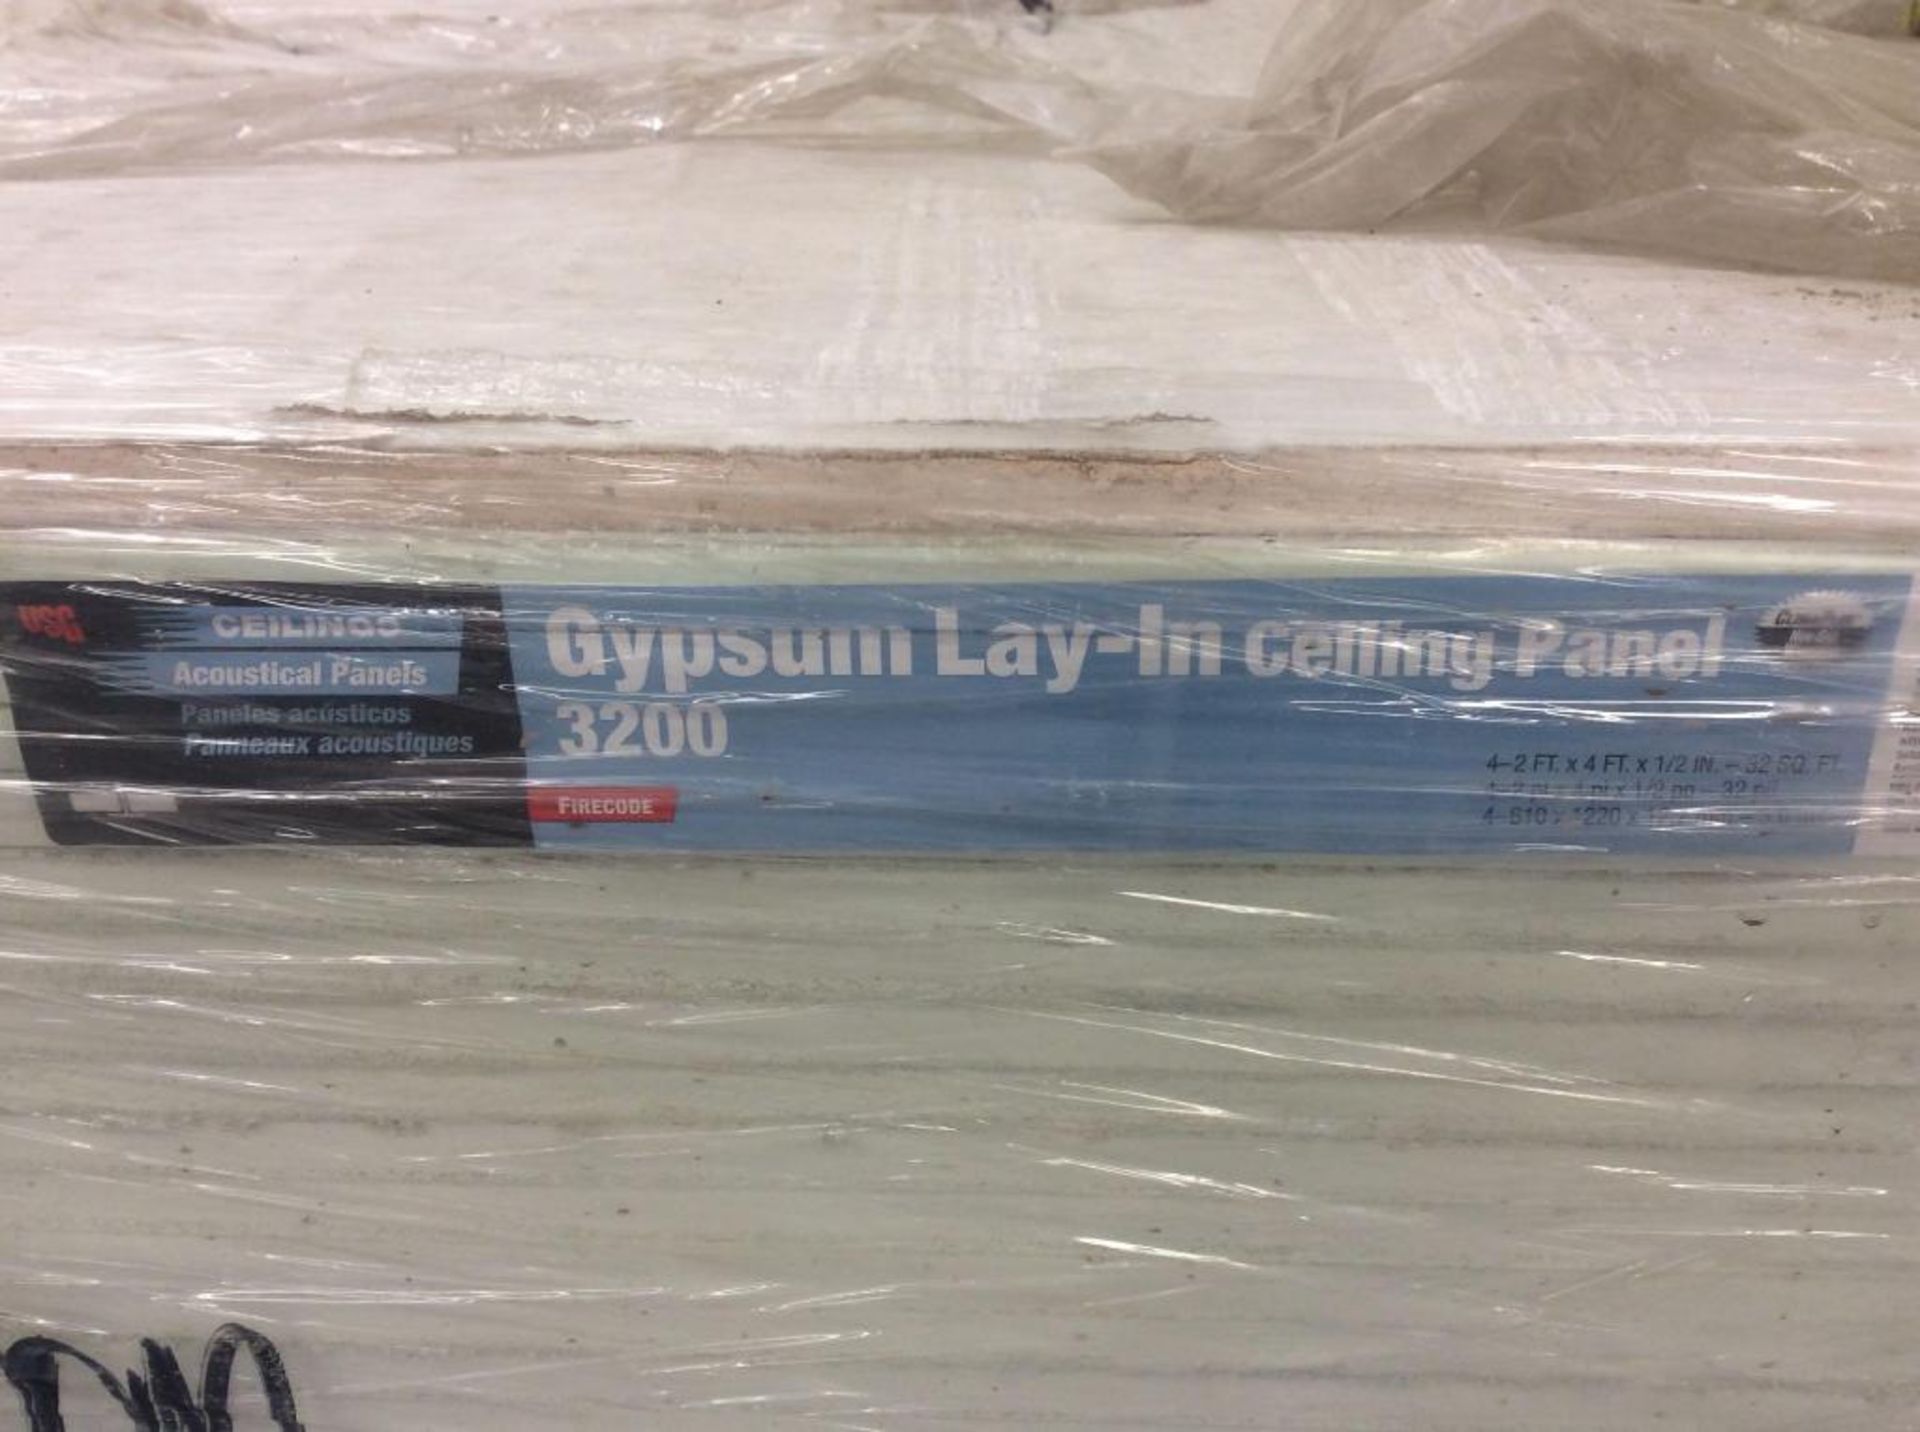 Lot of 24" x 48" gypsum lay-in ceiling panels - Image 2 of 2